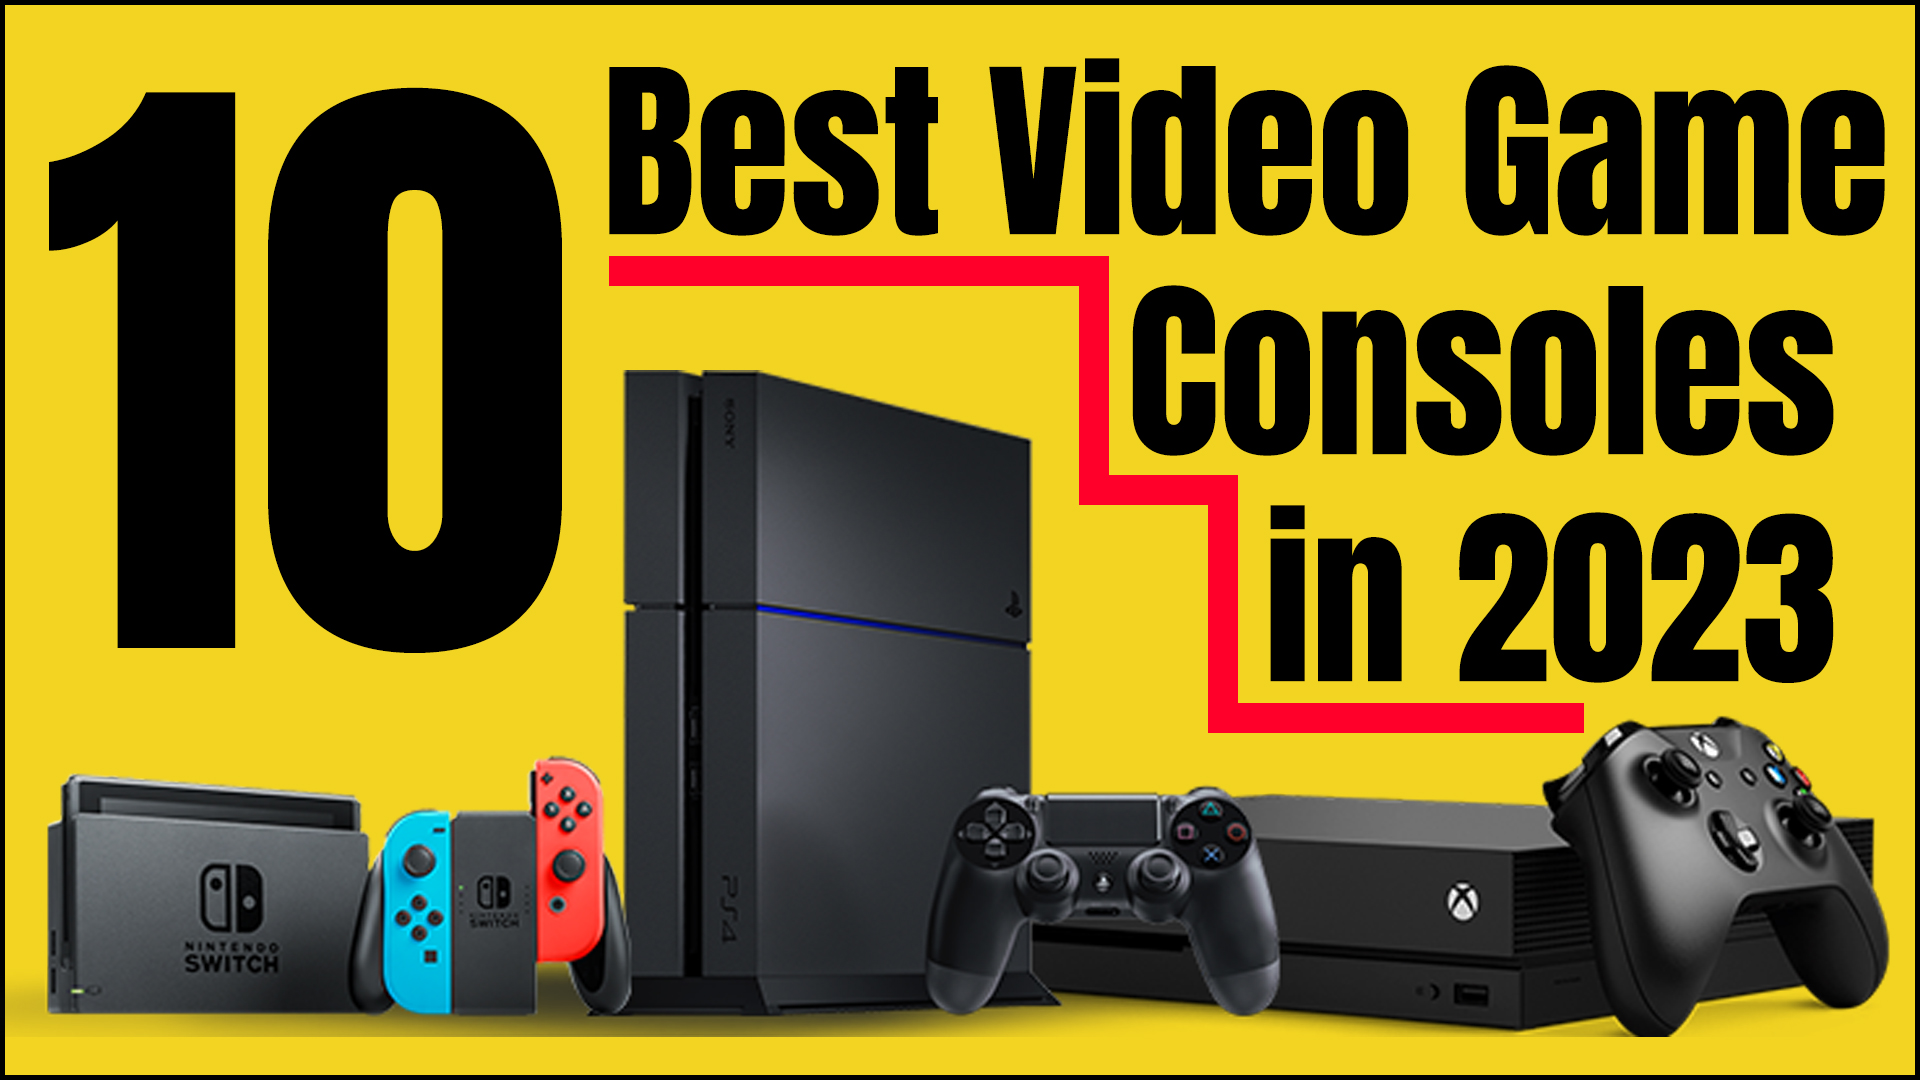 10 Best Video Game Consoles in 2023